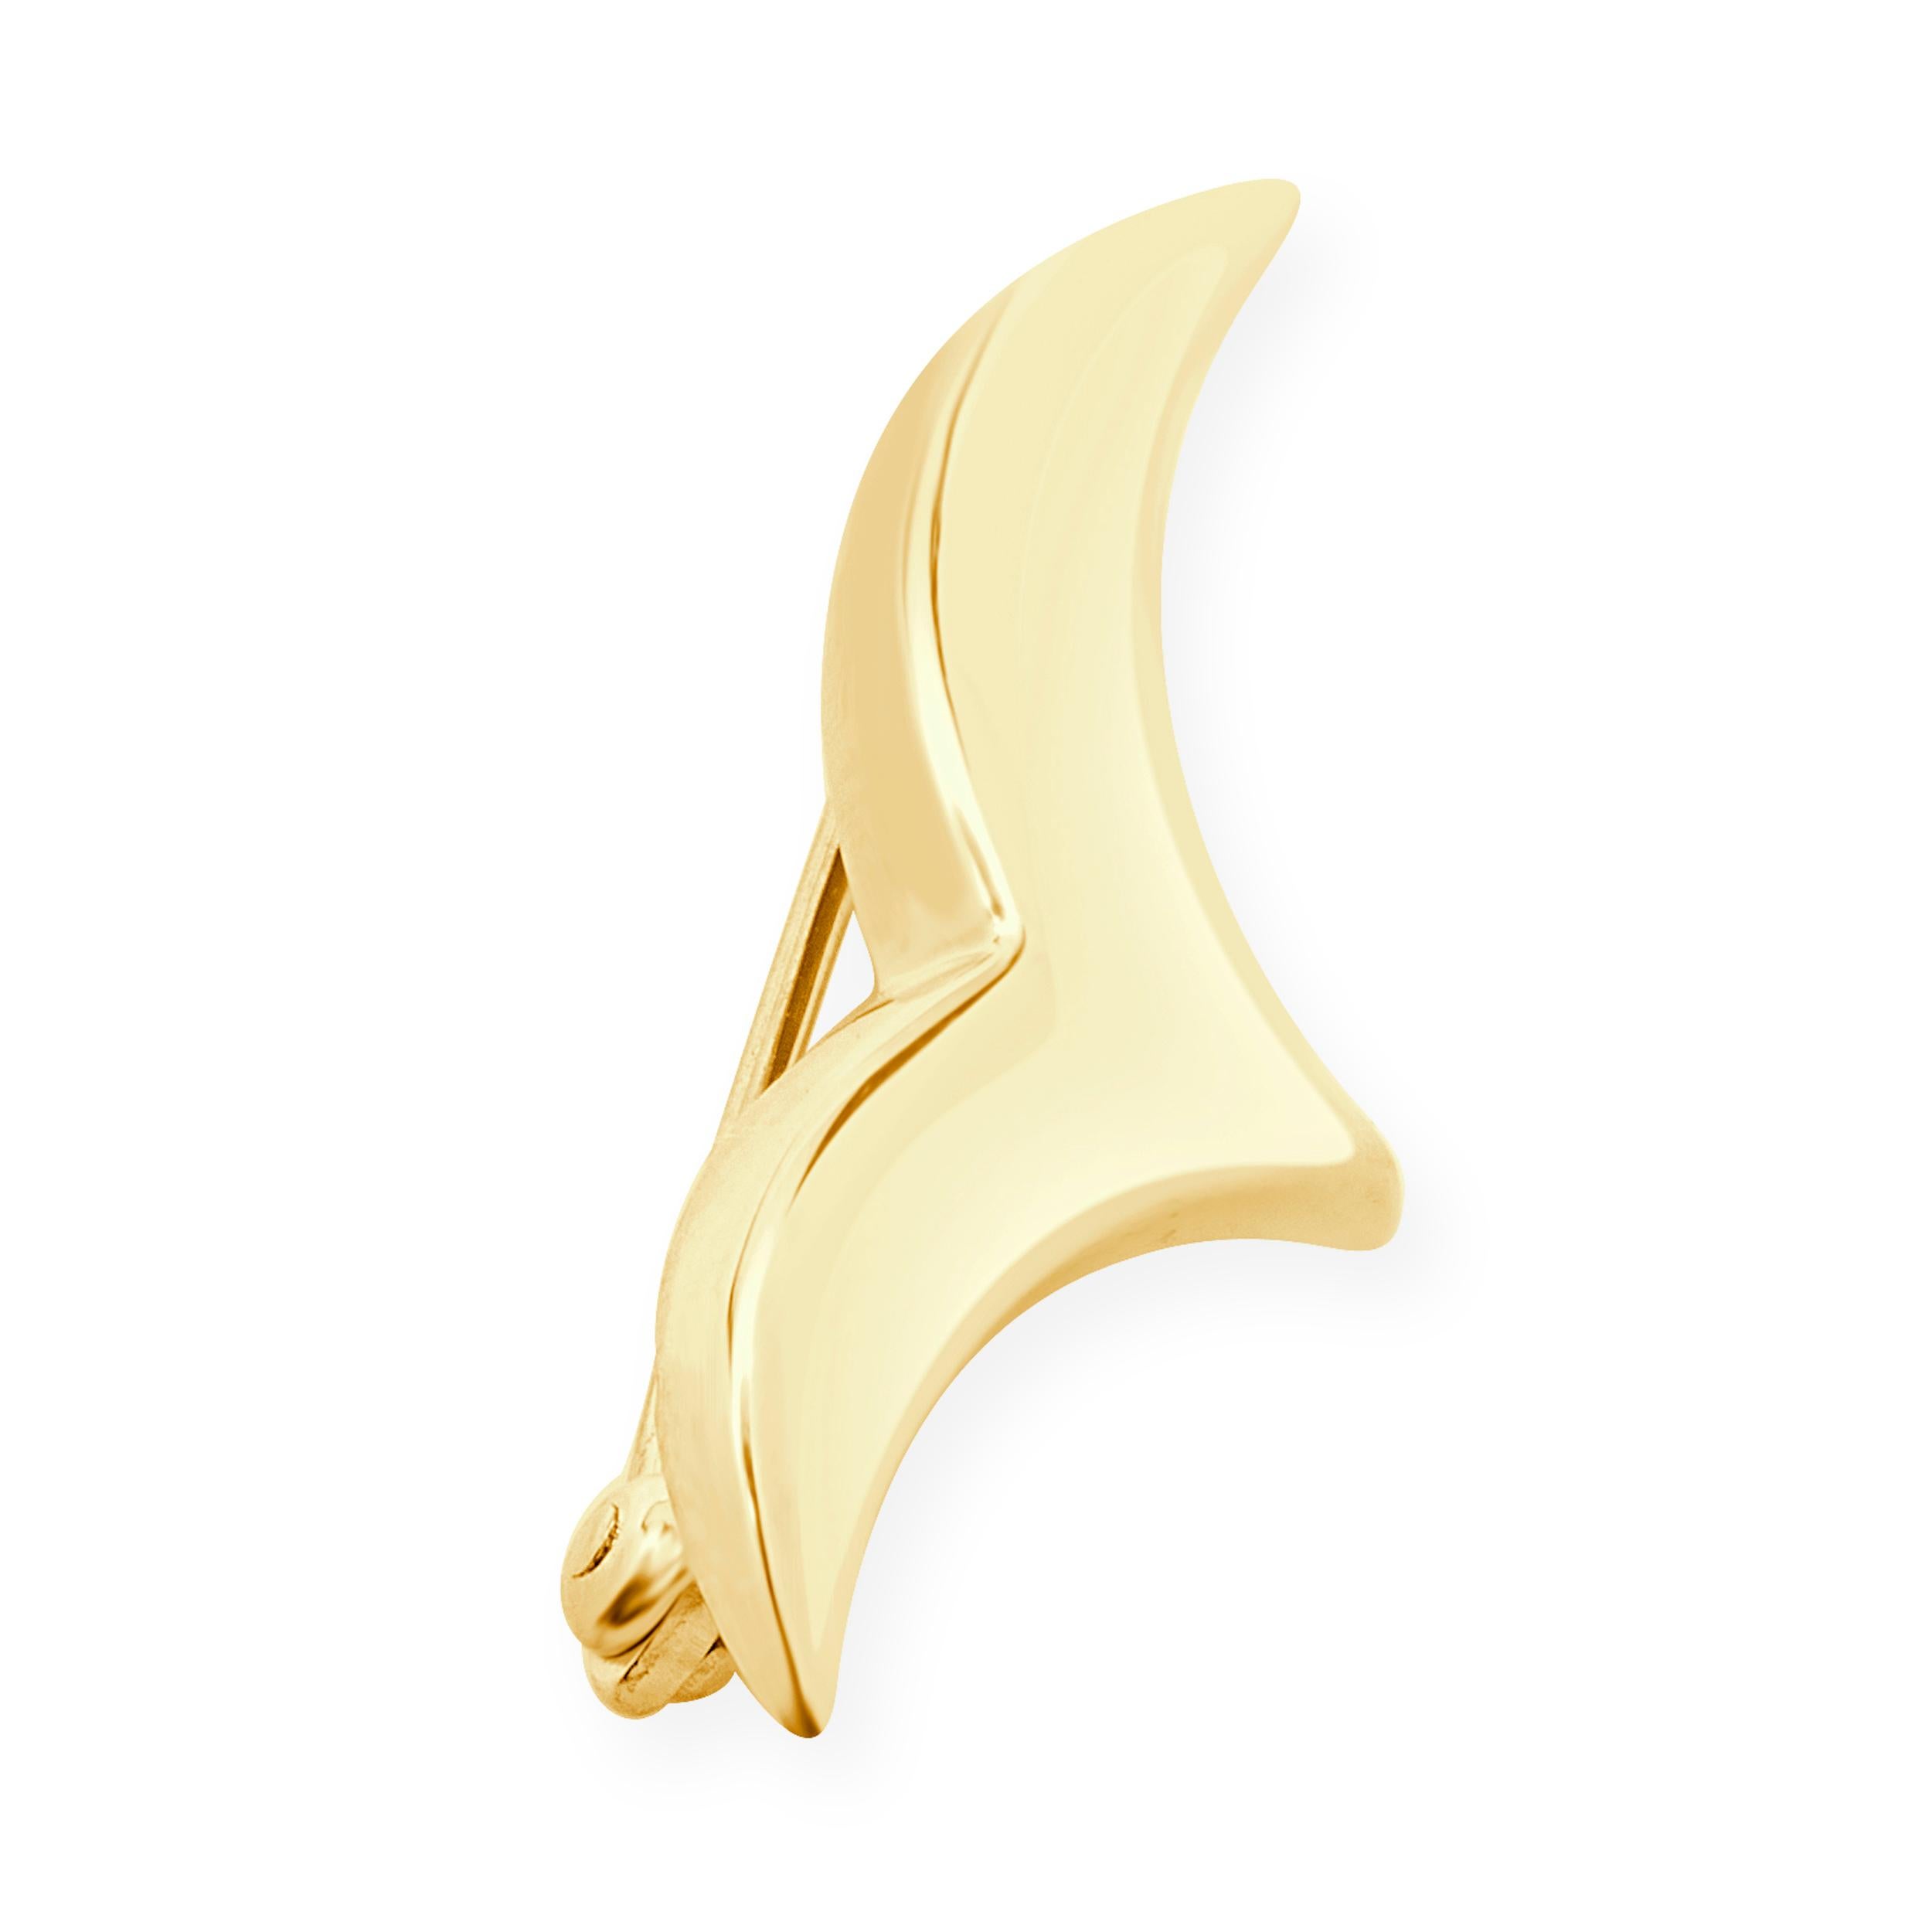 Designer: Tiffany & Co. 
Material: 18K yellow gold
Dimensions: pin measures 28 x 9.5mm
Weight: 2.62 grams
